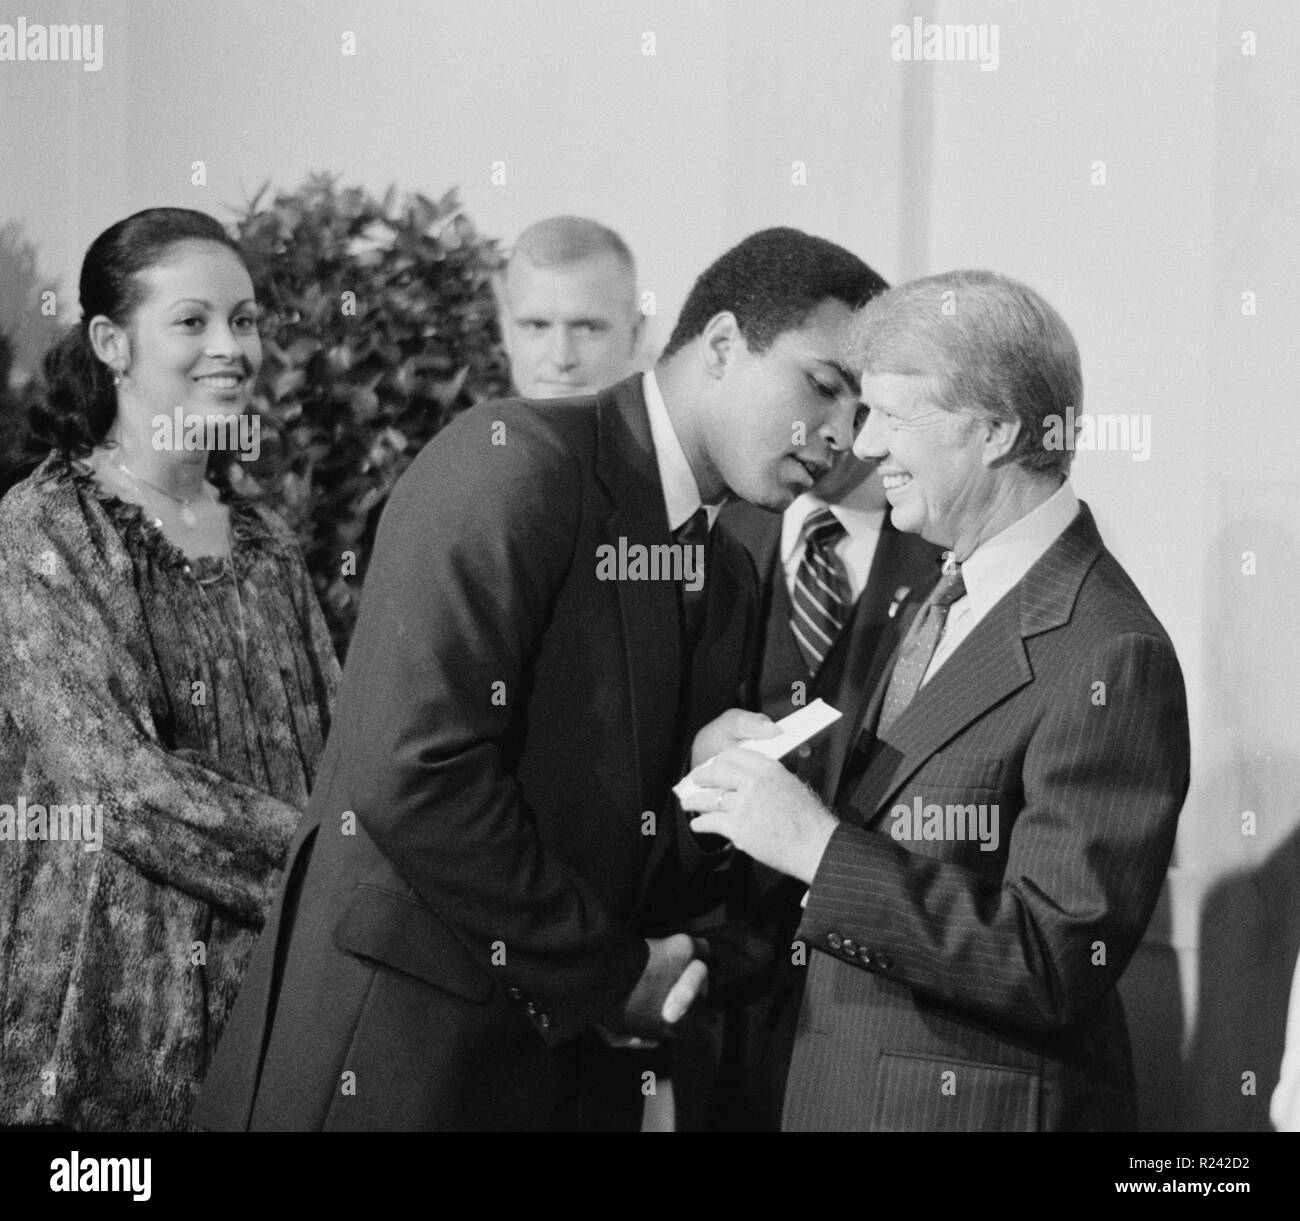 Photograph of President Jimmy Carter greeting Mohammed Ali at a White House Dinner celebrating the signing of the Panama Canal Treaty, Washington D.C. Photographed by Marion S. Trikosko. Dated 1977 Stock Photo